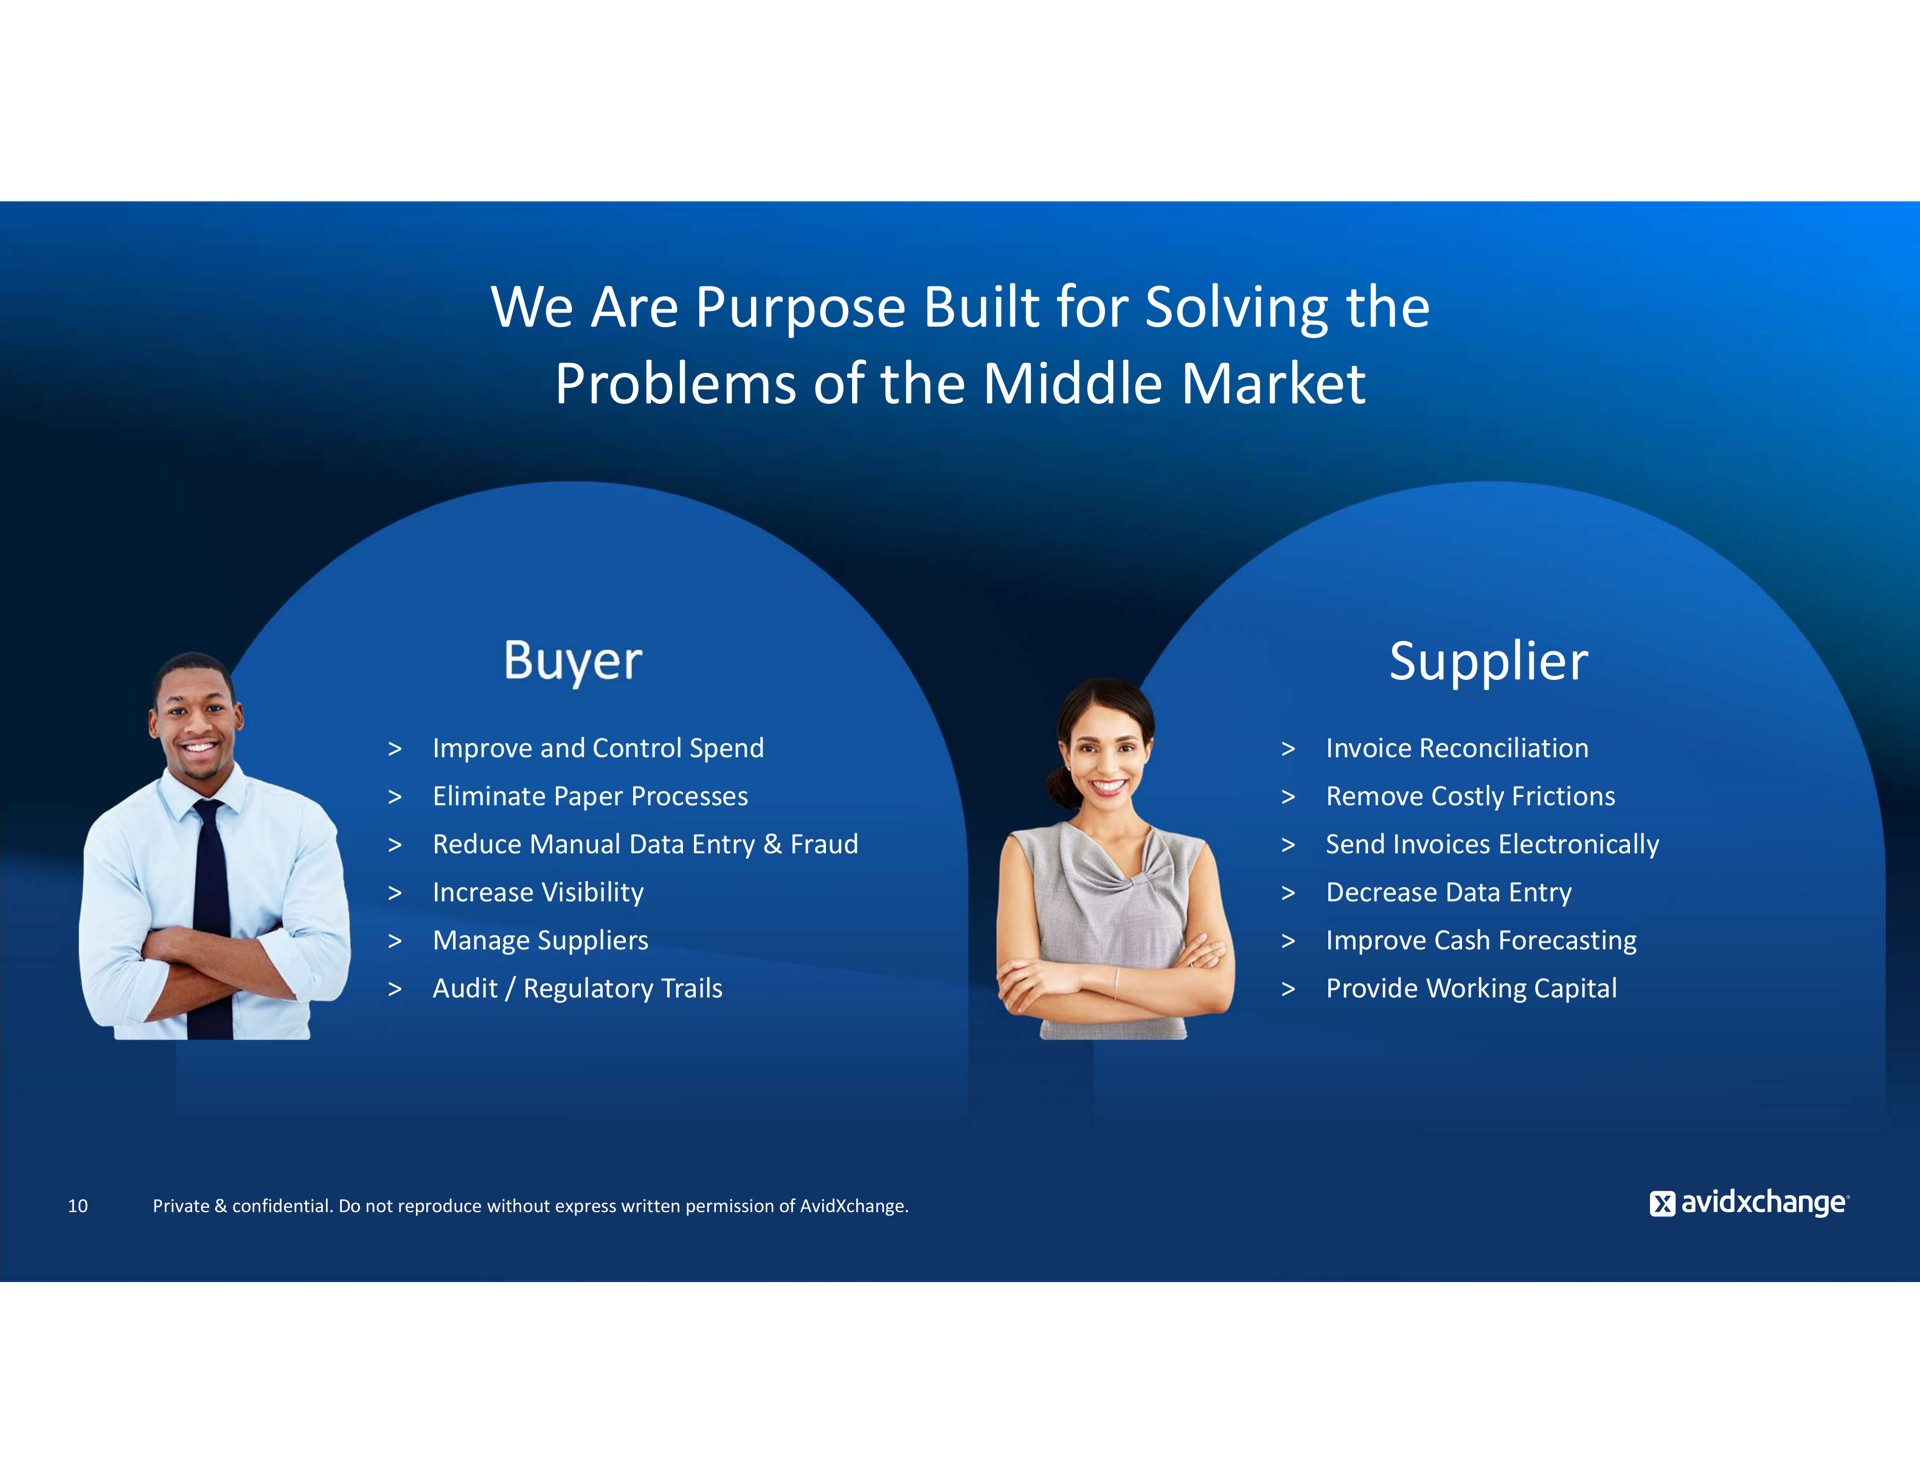 we are purpose built for solving the problems of the middle market buyer supplier | AvidXchange